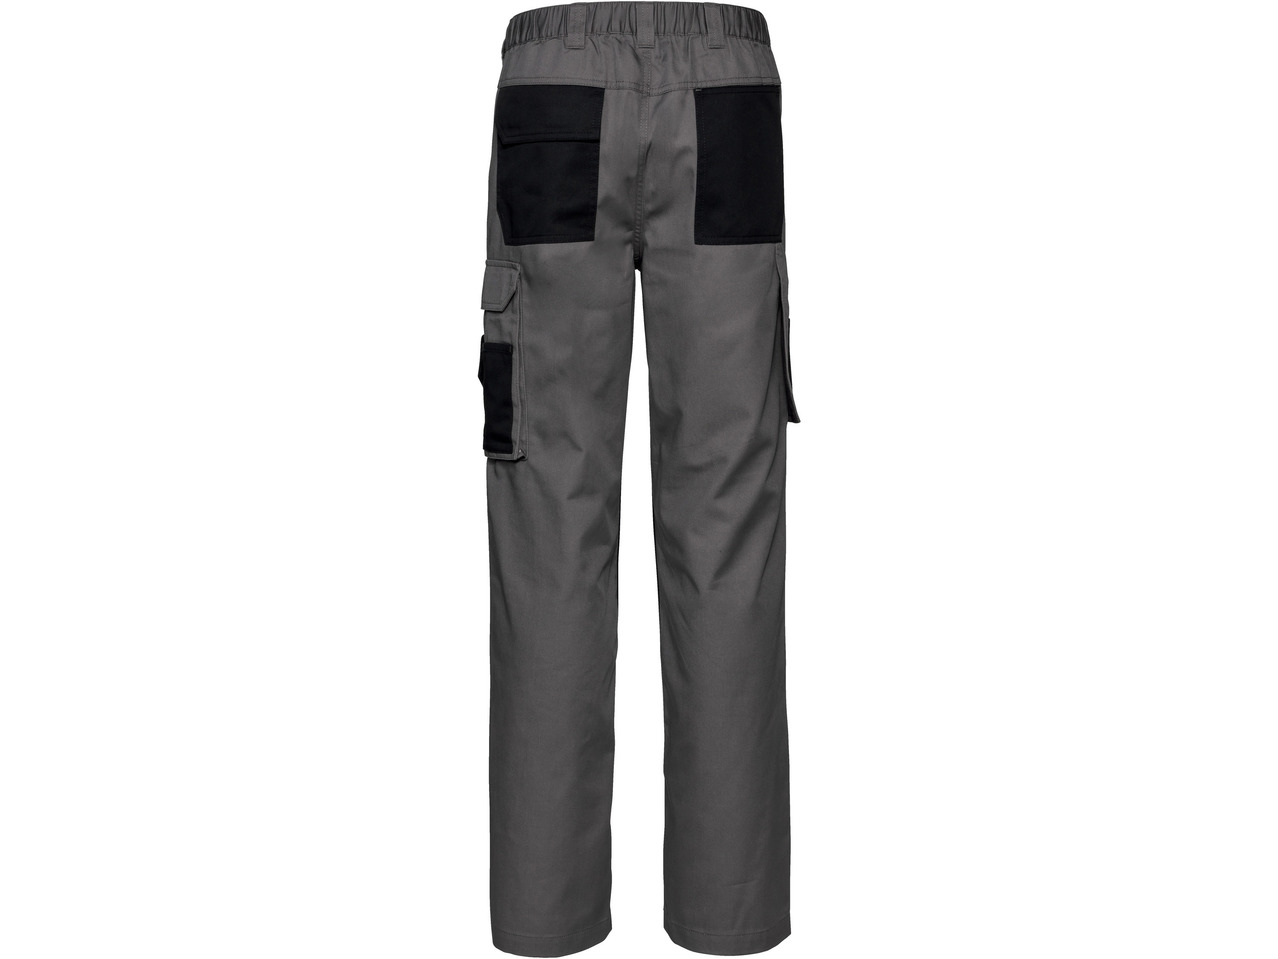 Men's Work Trousers - Lidl — Northern Ireland - Specials archive